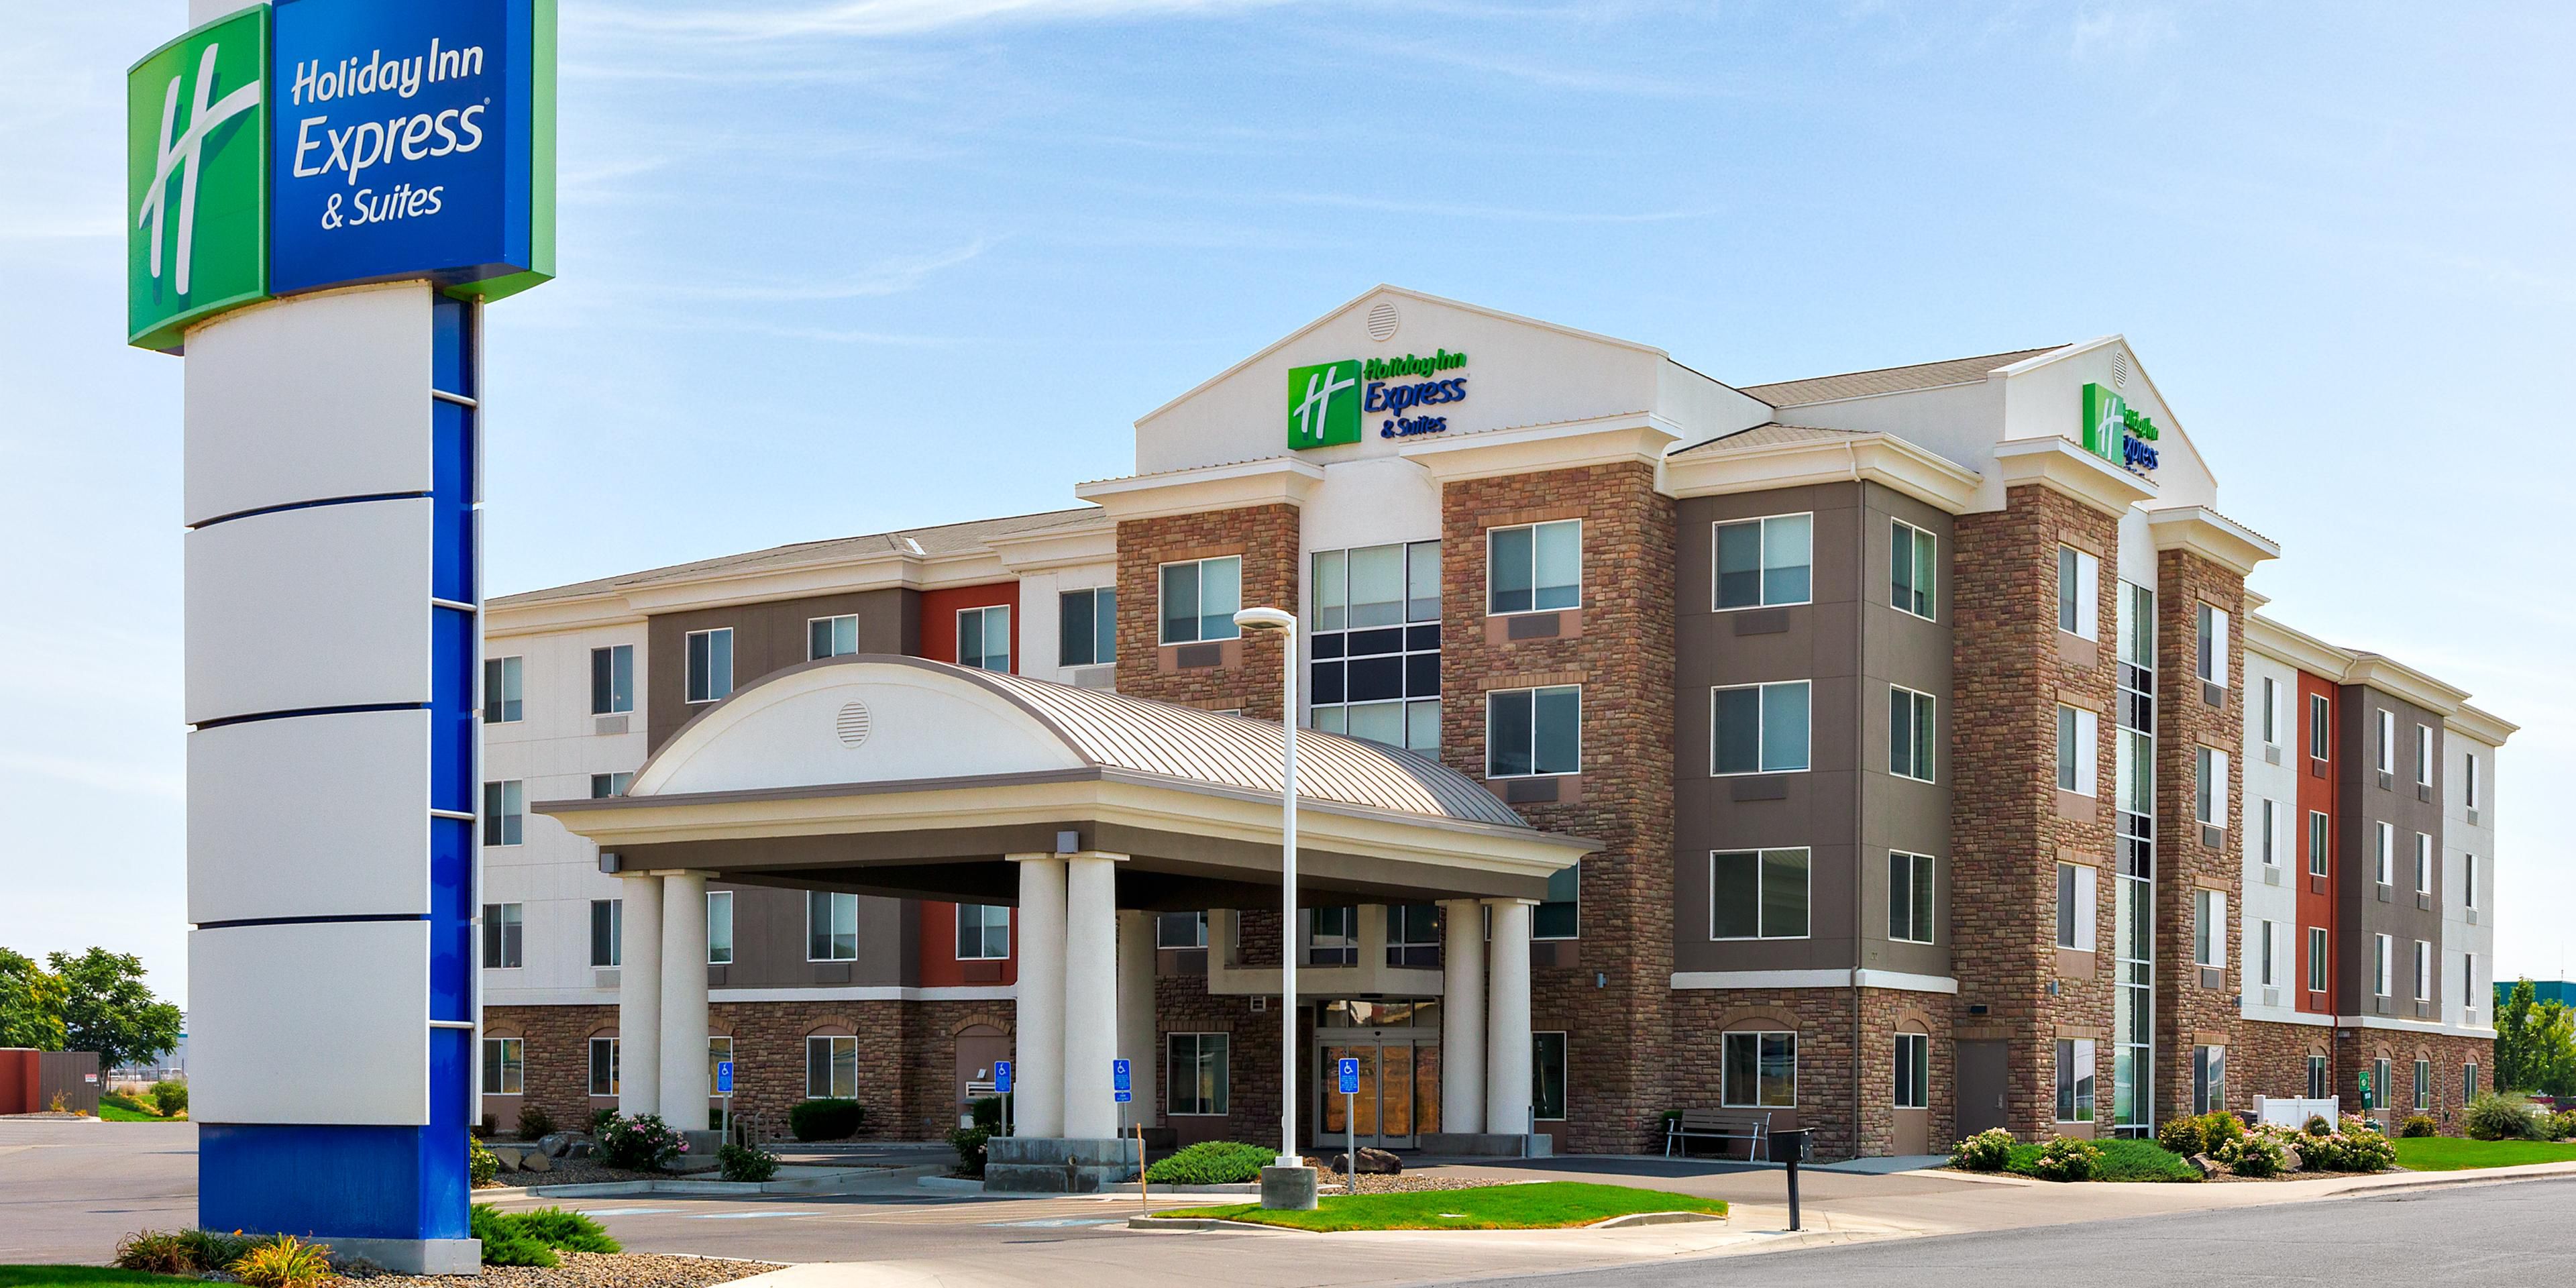 Located halfway between Portland, OR and Salt Lake City, UT, the Holiday Inn Express Ontario is ideal for all travelers